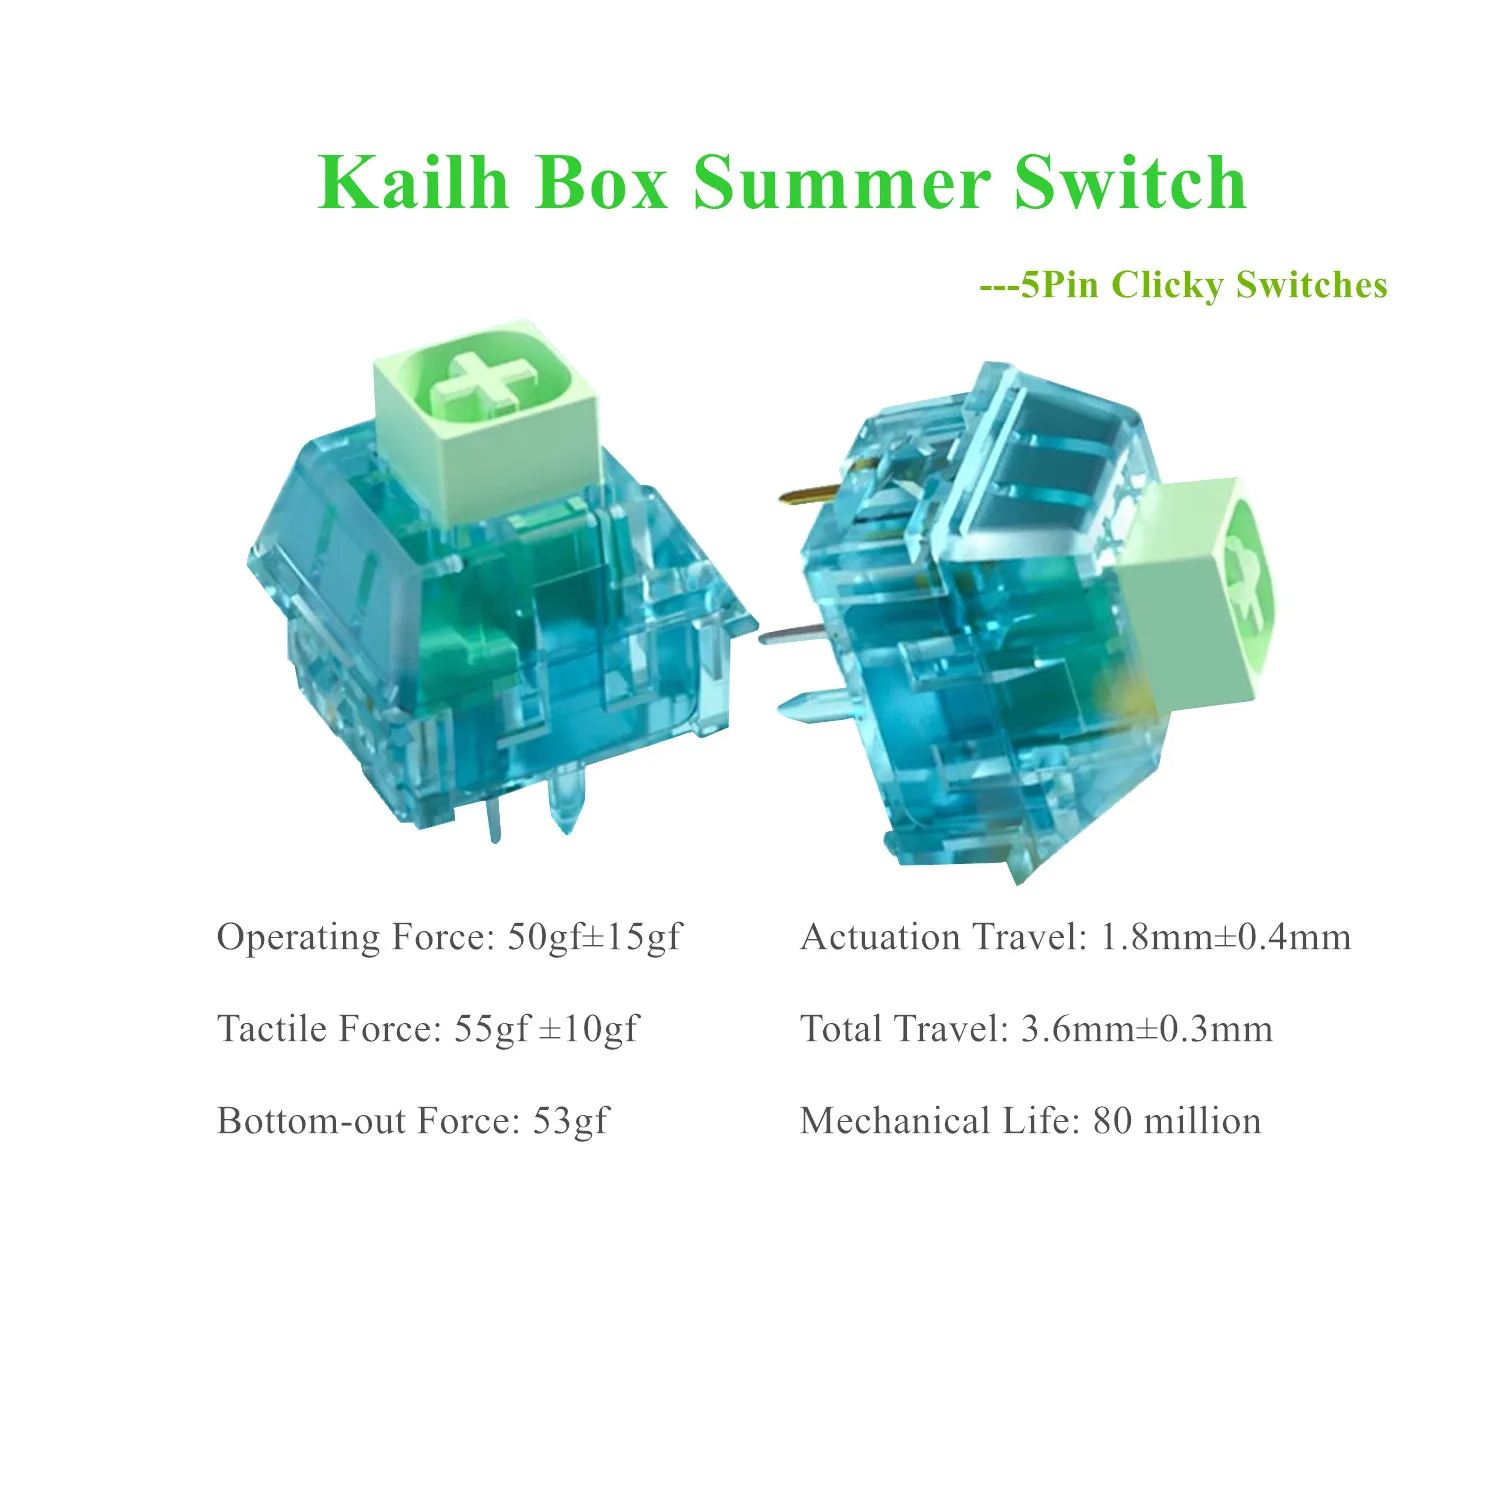 

Wholesale Kailh BOX Summer Switch 1000PCS 5pin Clicky Switches Axis for MX Mechanical Keyboard